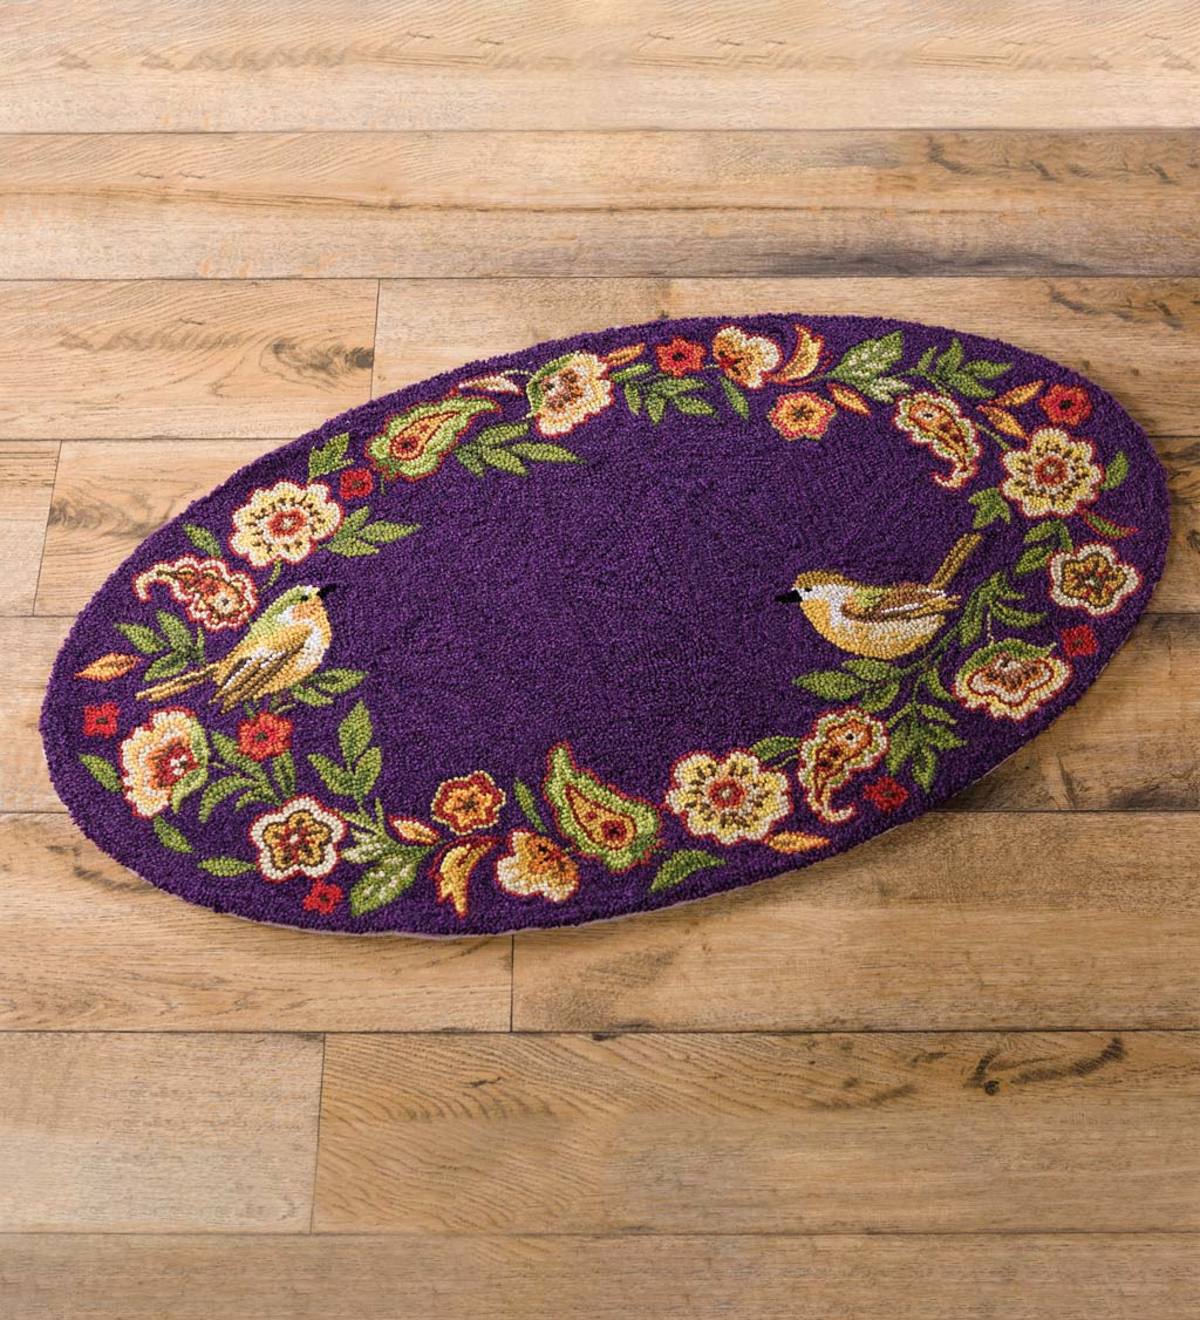 Delilah Hooked Wool Oval Accent Rug